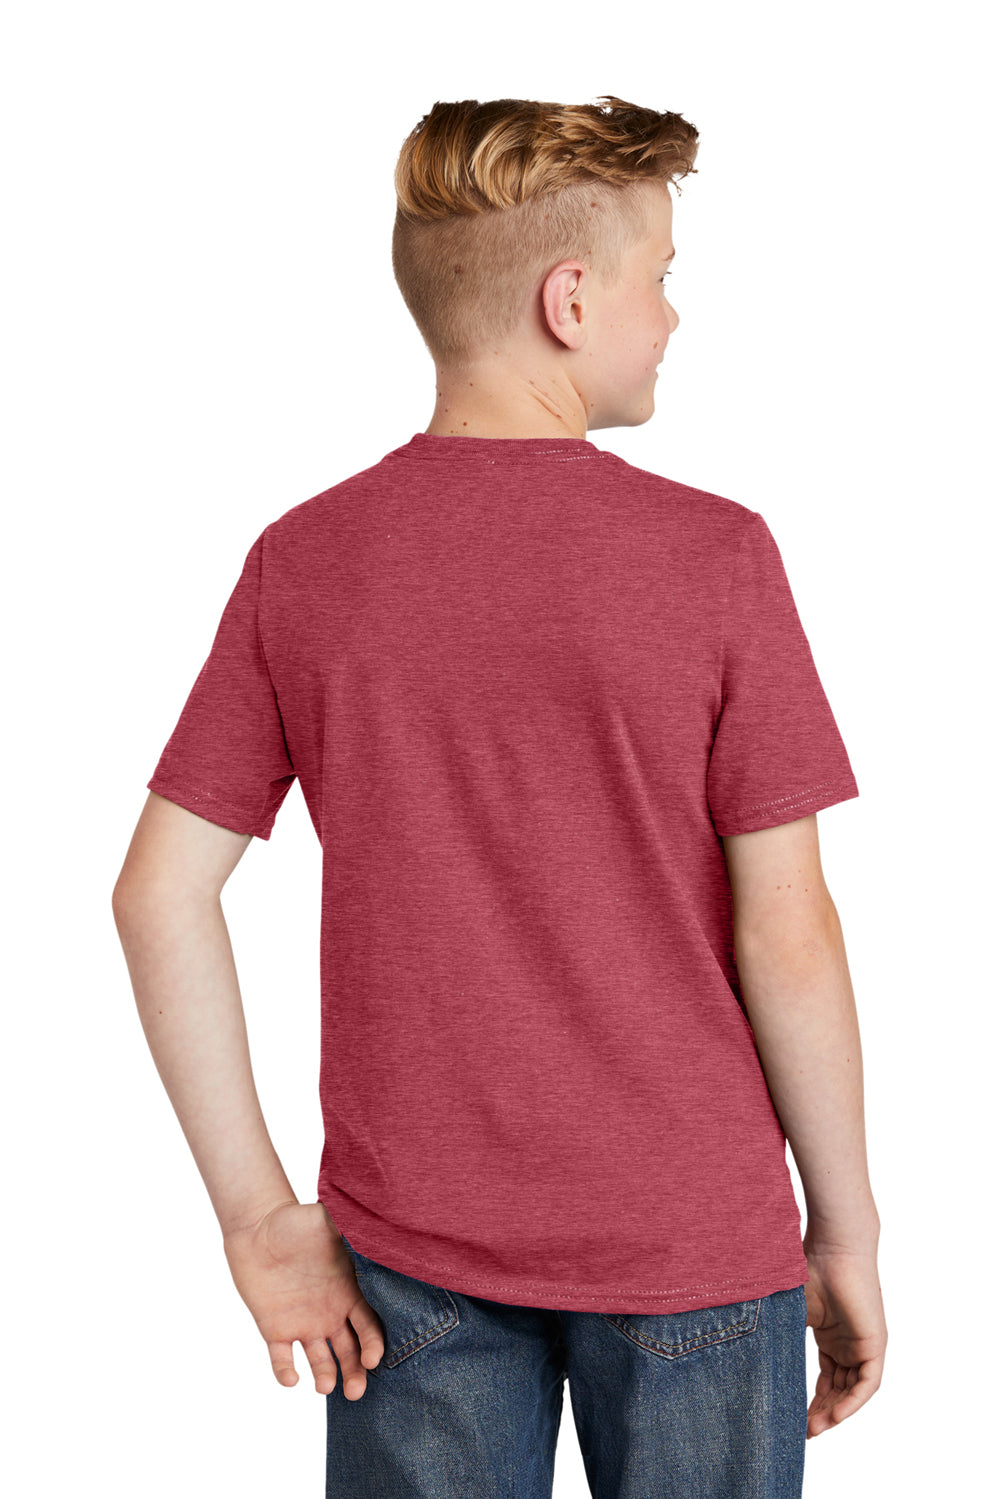 District DT6000Y Youth Very Important Short Sleeve Crewneck T-Shirt Heather Cardinal Red Back